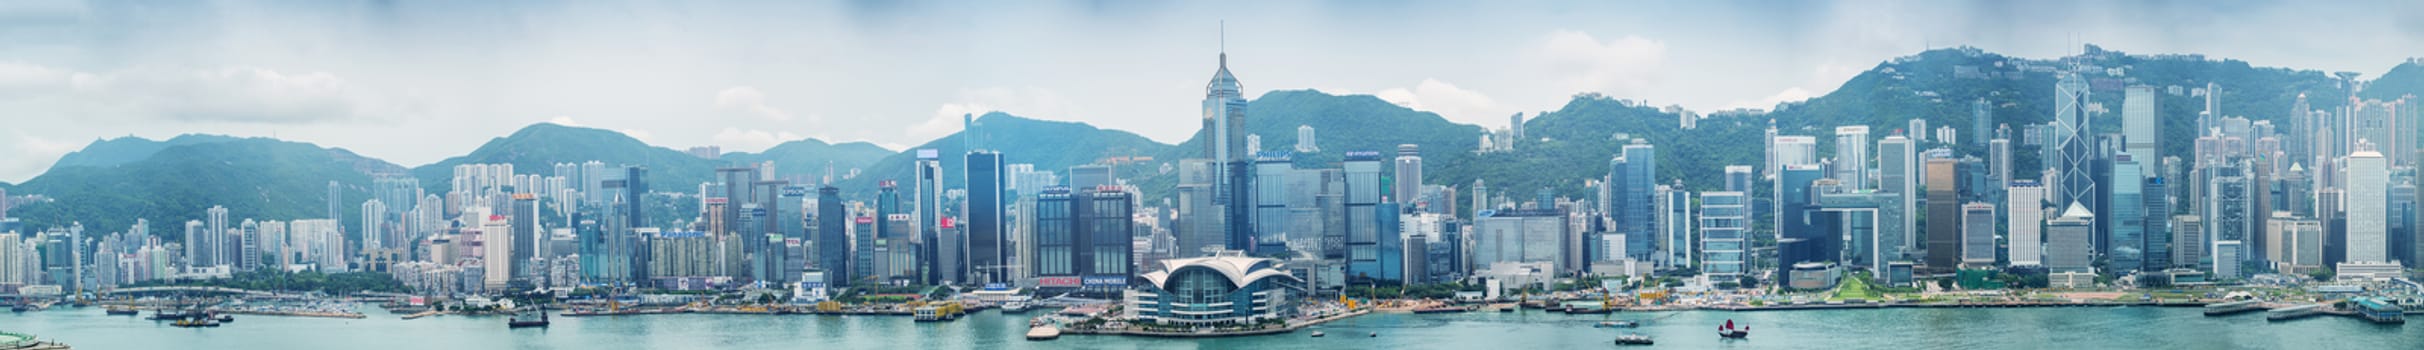 HONG KONG - MAY 12, 2014: Stunning panoramic view of Hong Kong Island skyline on a cloudy day. Last year HK hosted more than 54 million visitors, most of them from the mainland.